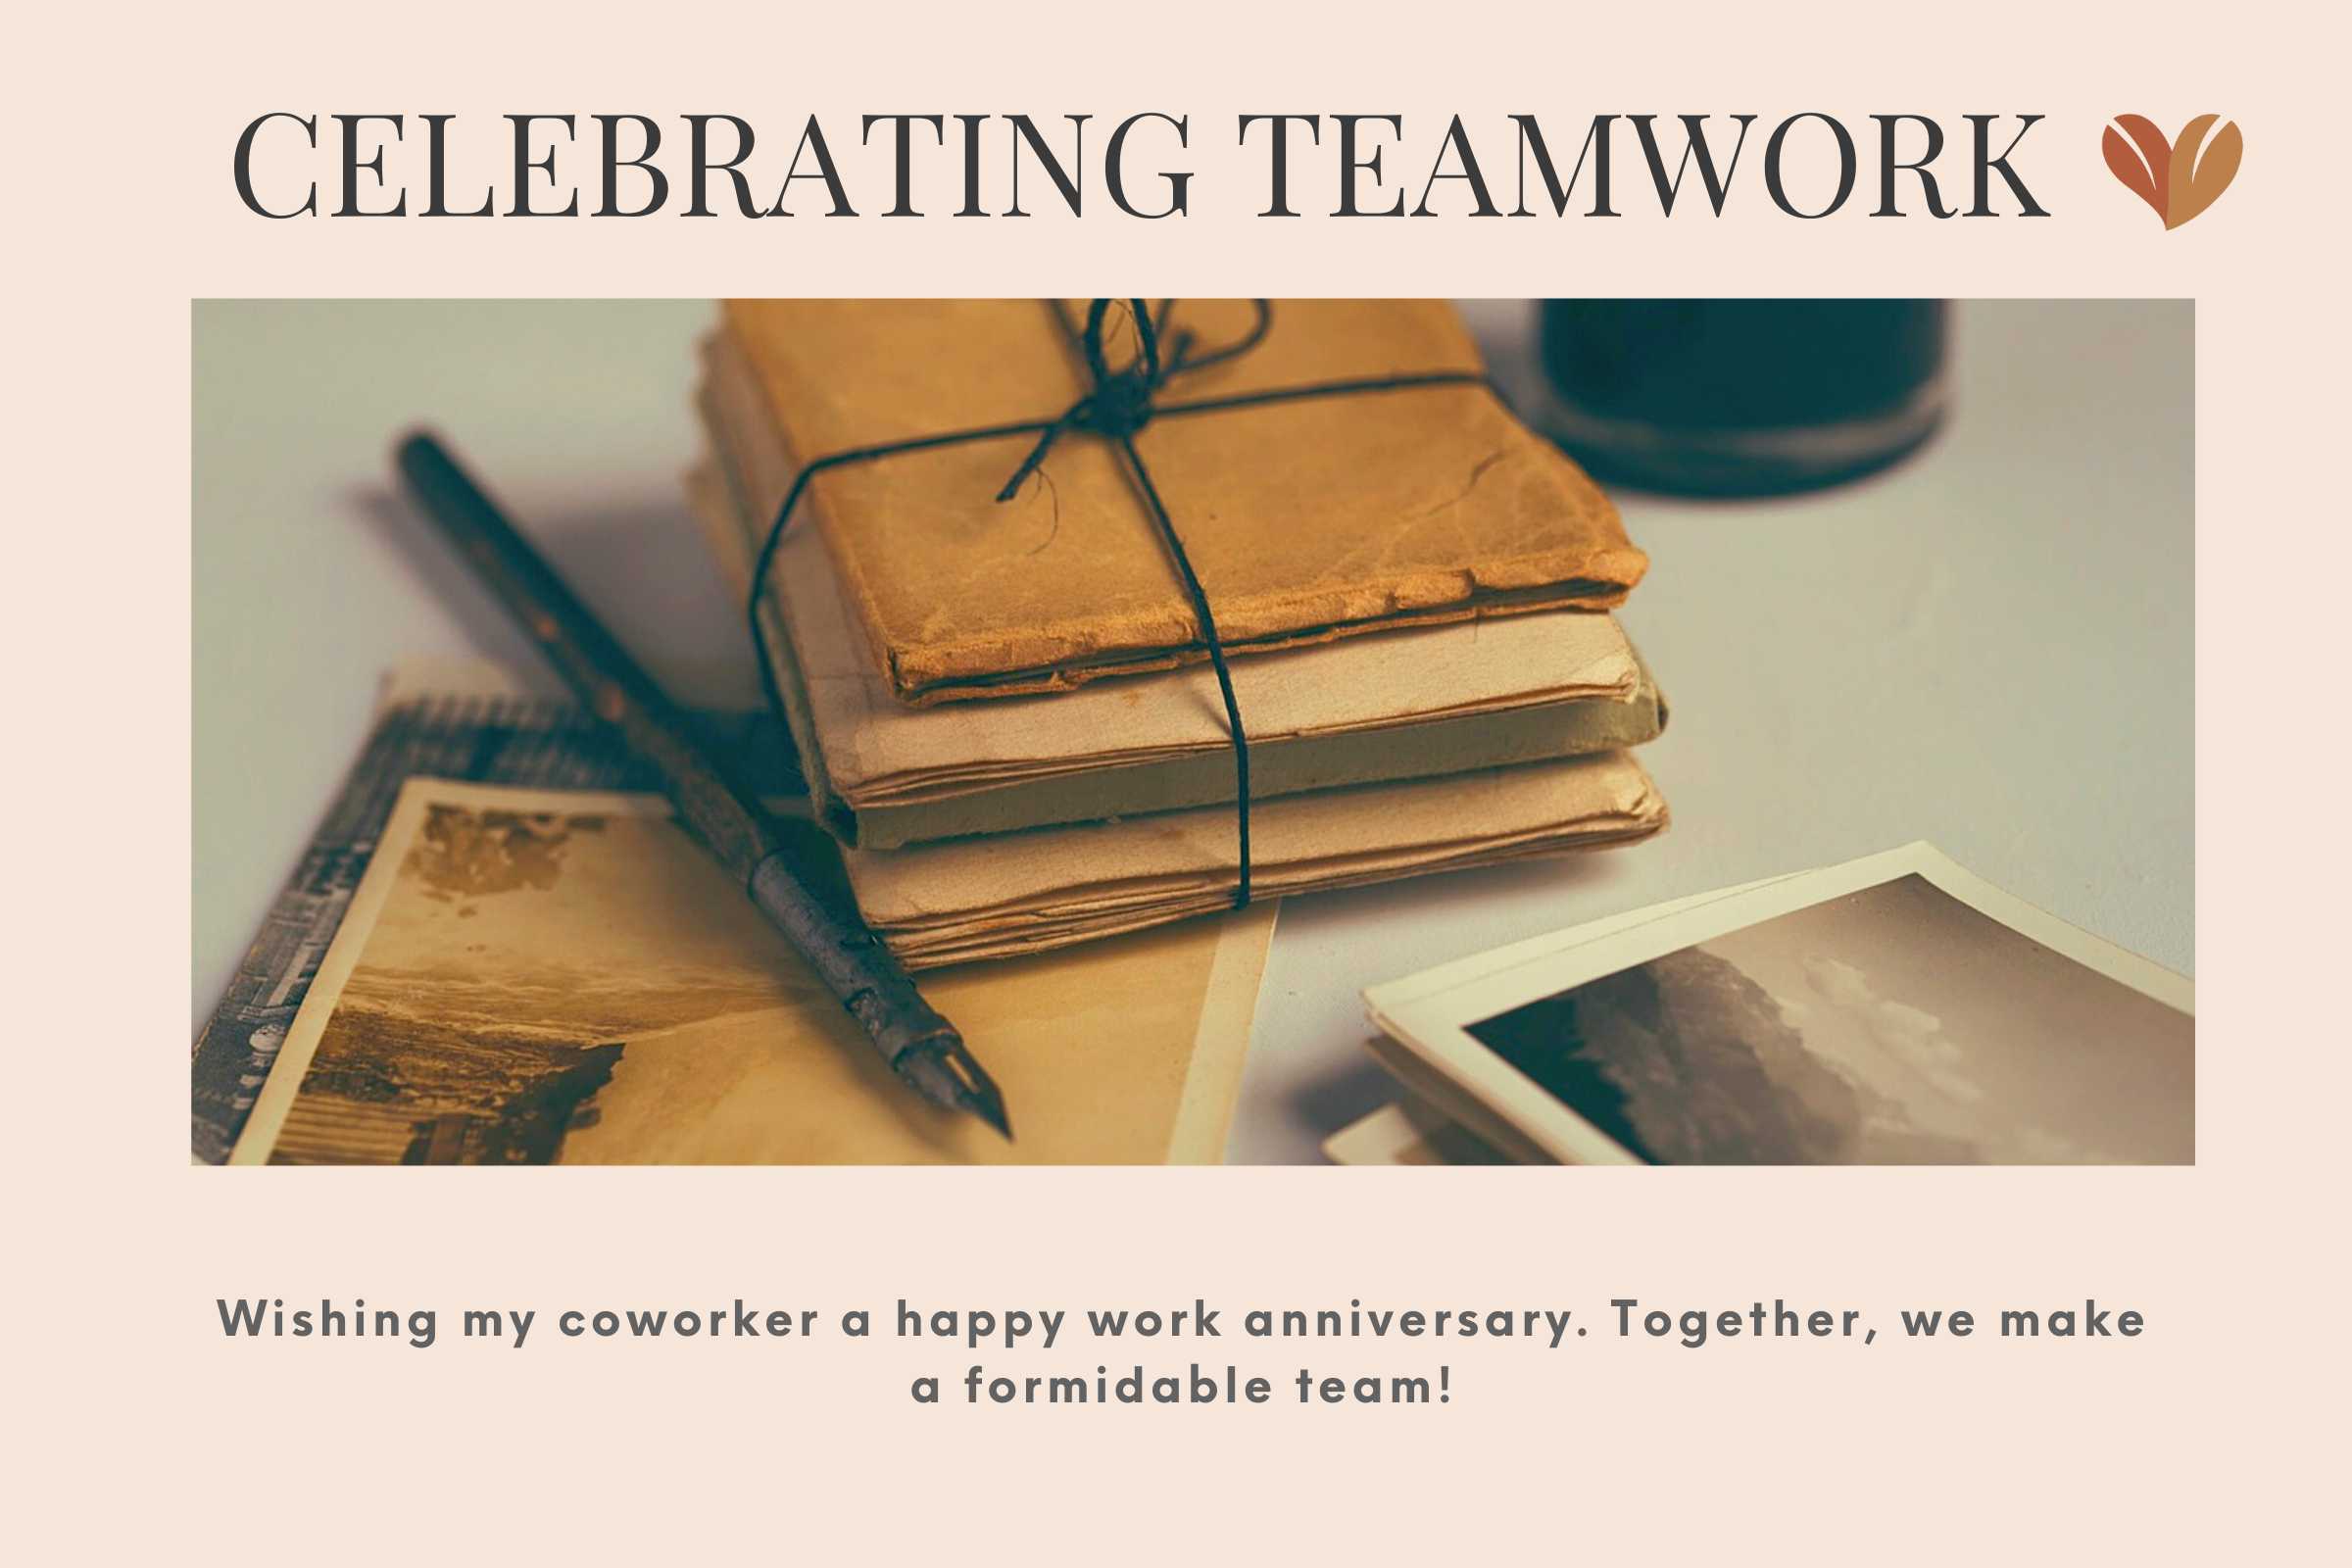 Cheers to another year of teamwork and camaraderie! - work anniversary quotes